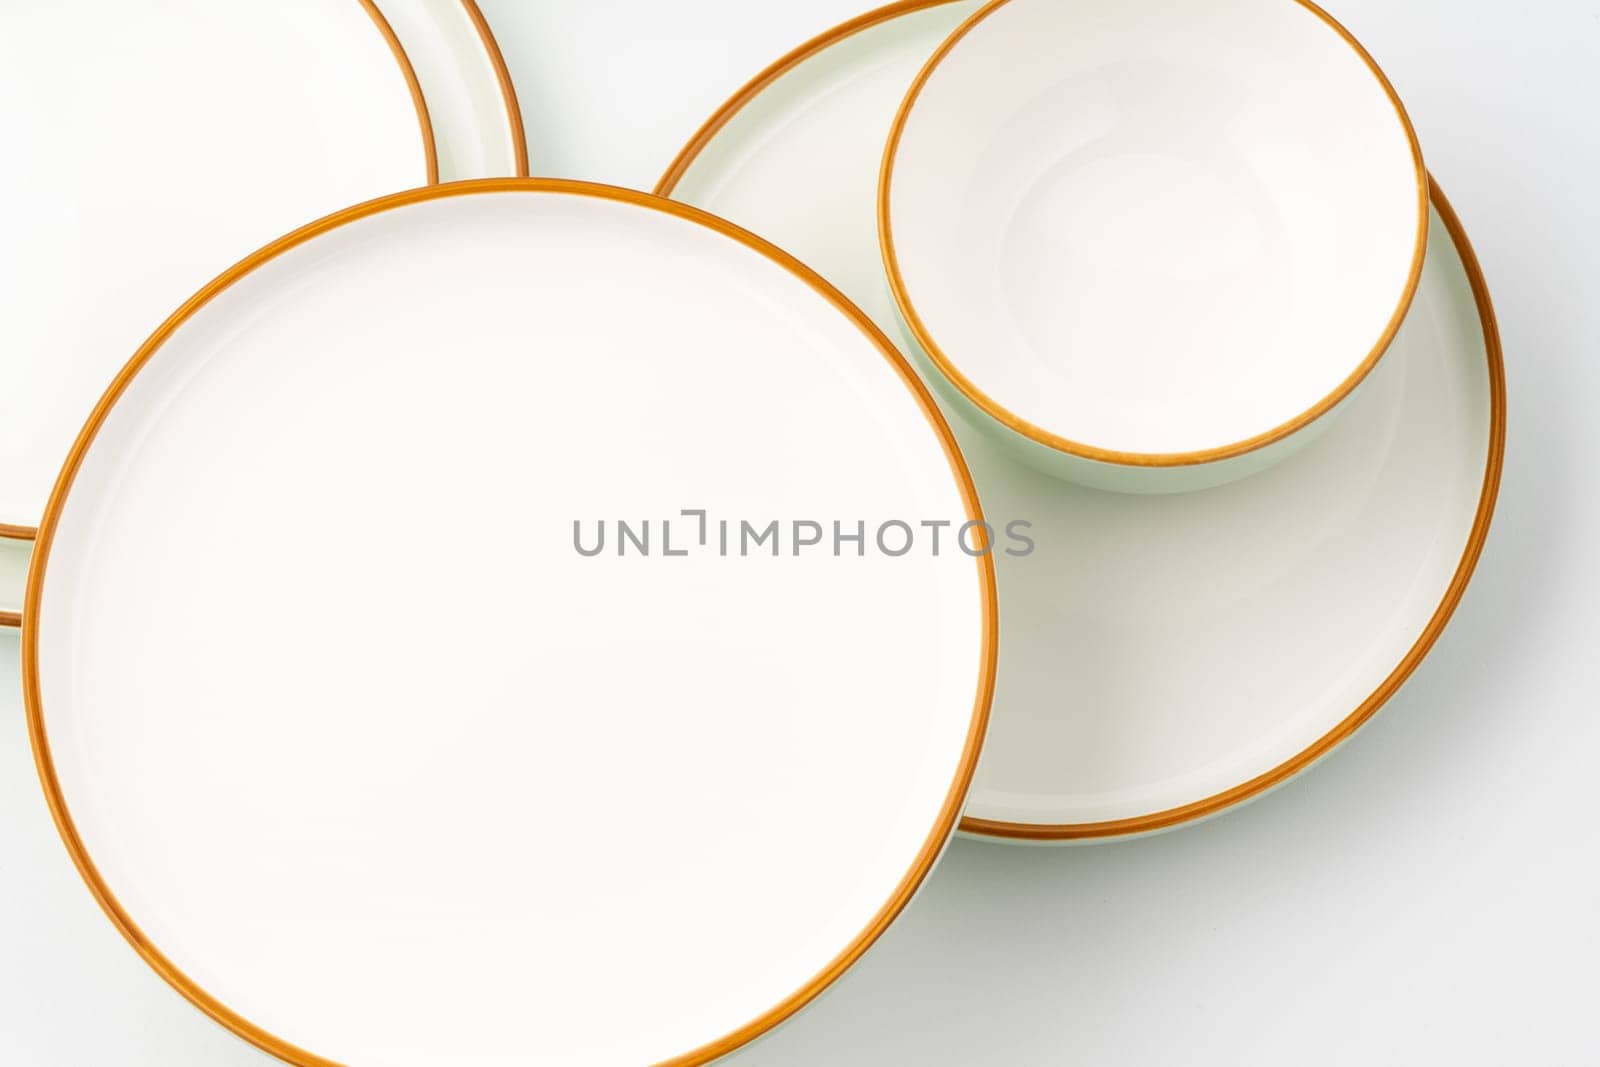 A set of ceramic tableware isolated on white background